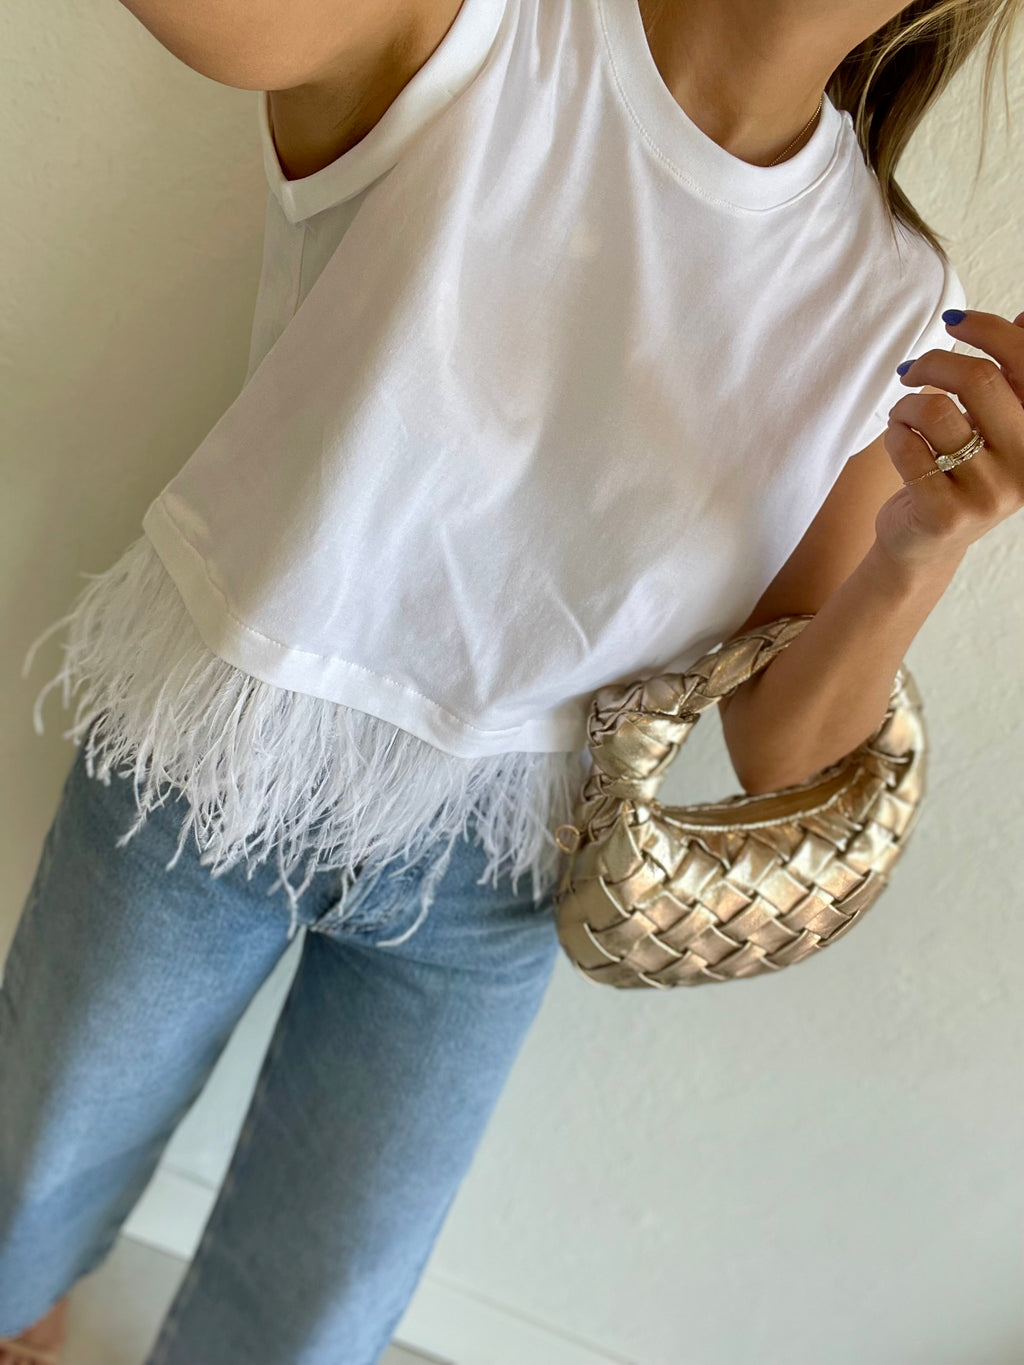 Cropped Feather Tee